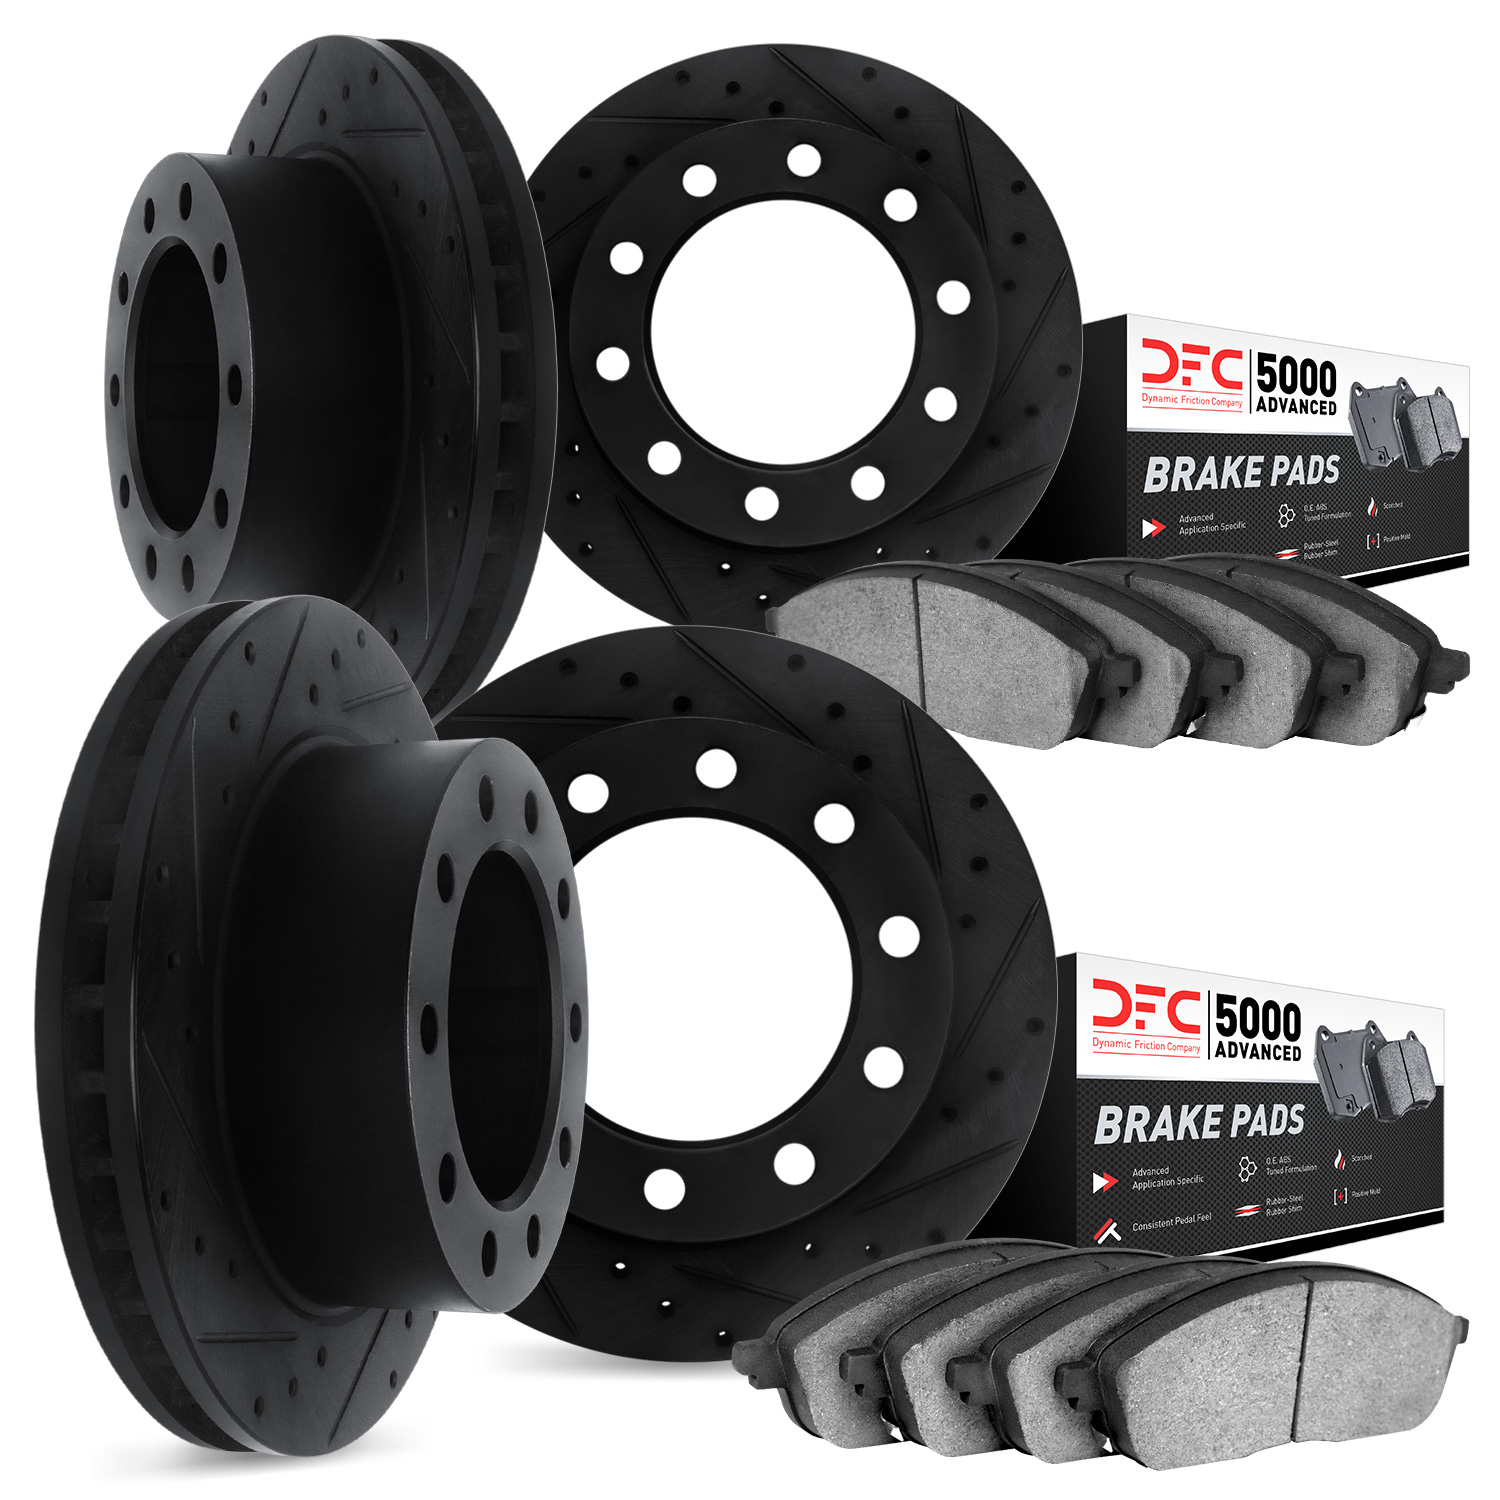 8504-54407 Drilled/Slotted Brake Rotors w/5000 Advanced Brake Pads Kit [Black], Fits Select Ford/Lincoln/Mercury/Mazda, Position